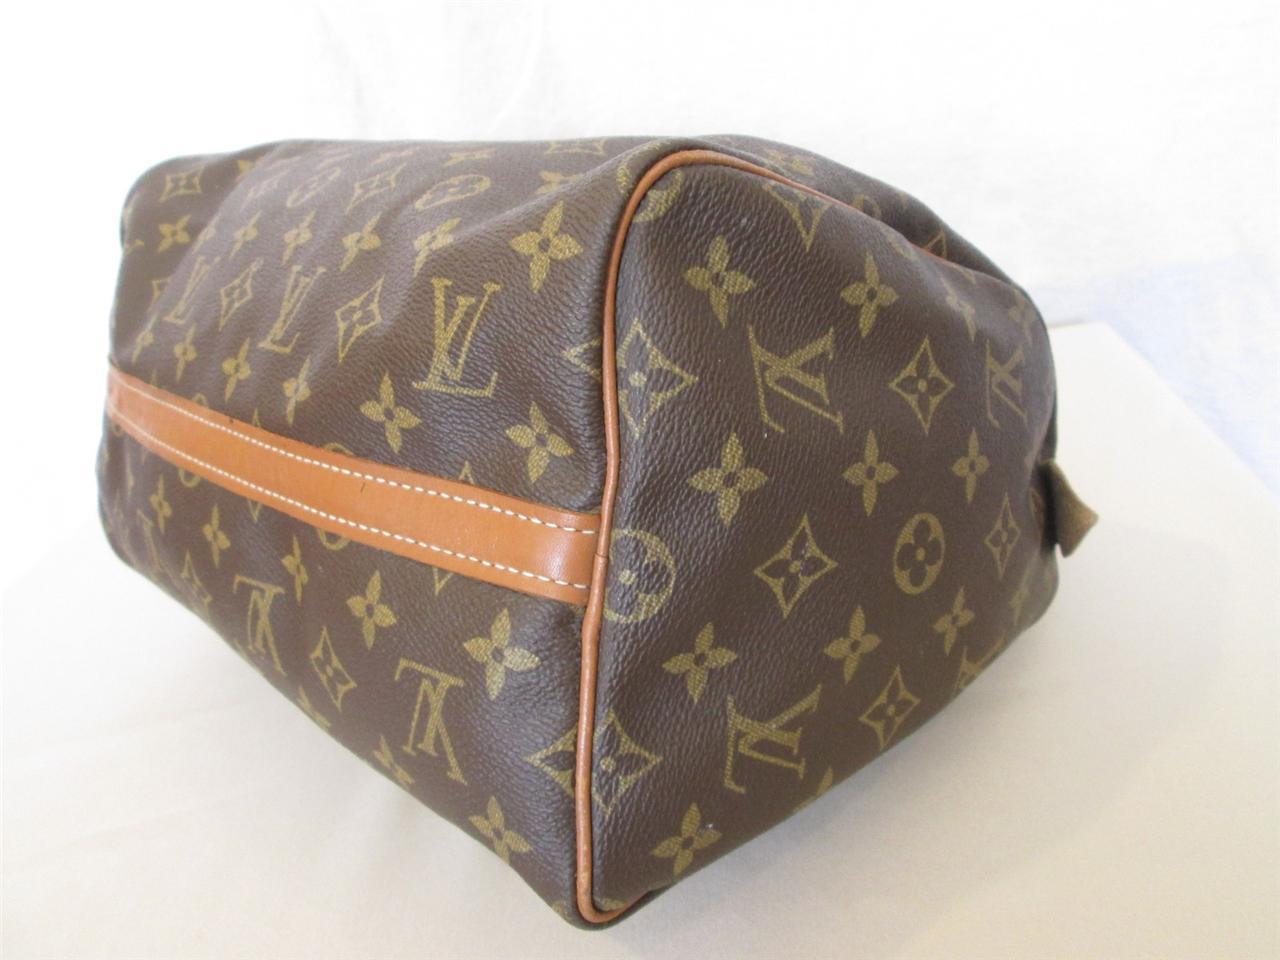 Authentic Louis Vuitton French Co. USA Speedy 30 Monogram under Special License - 1970s